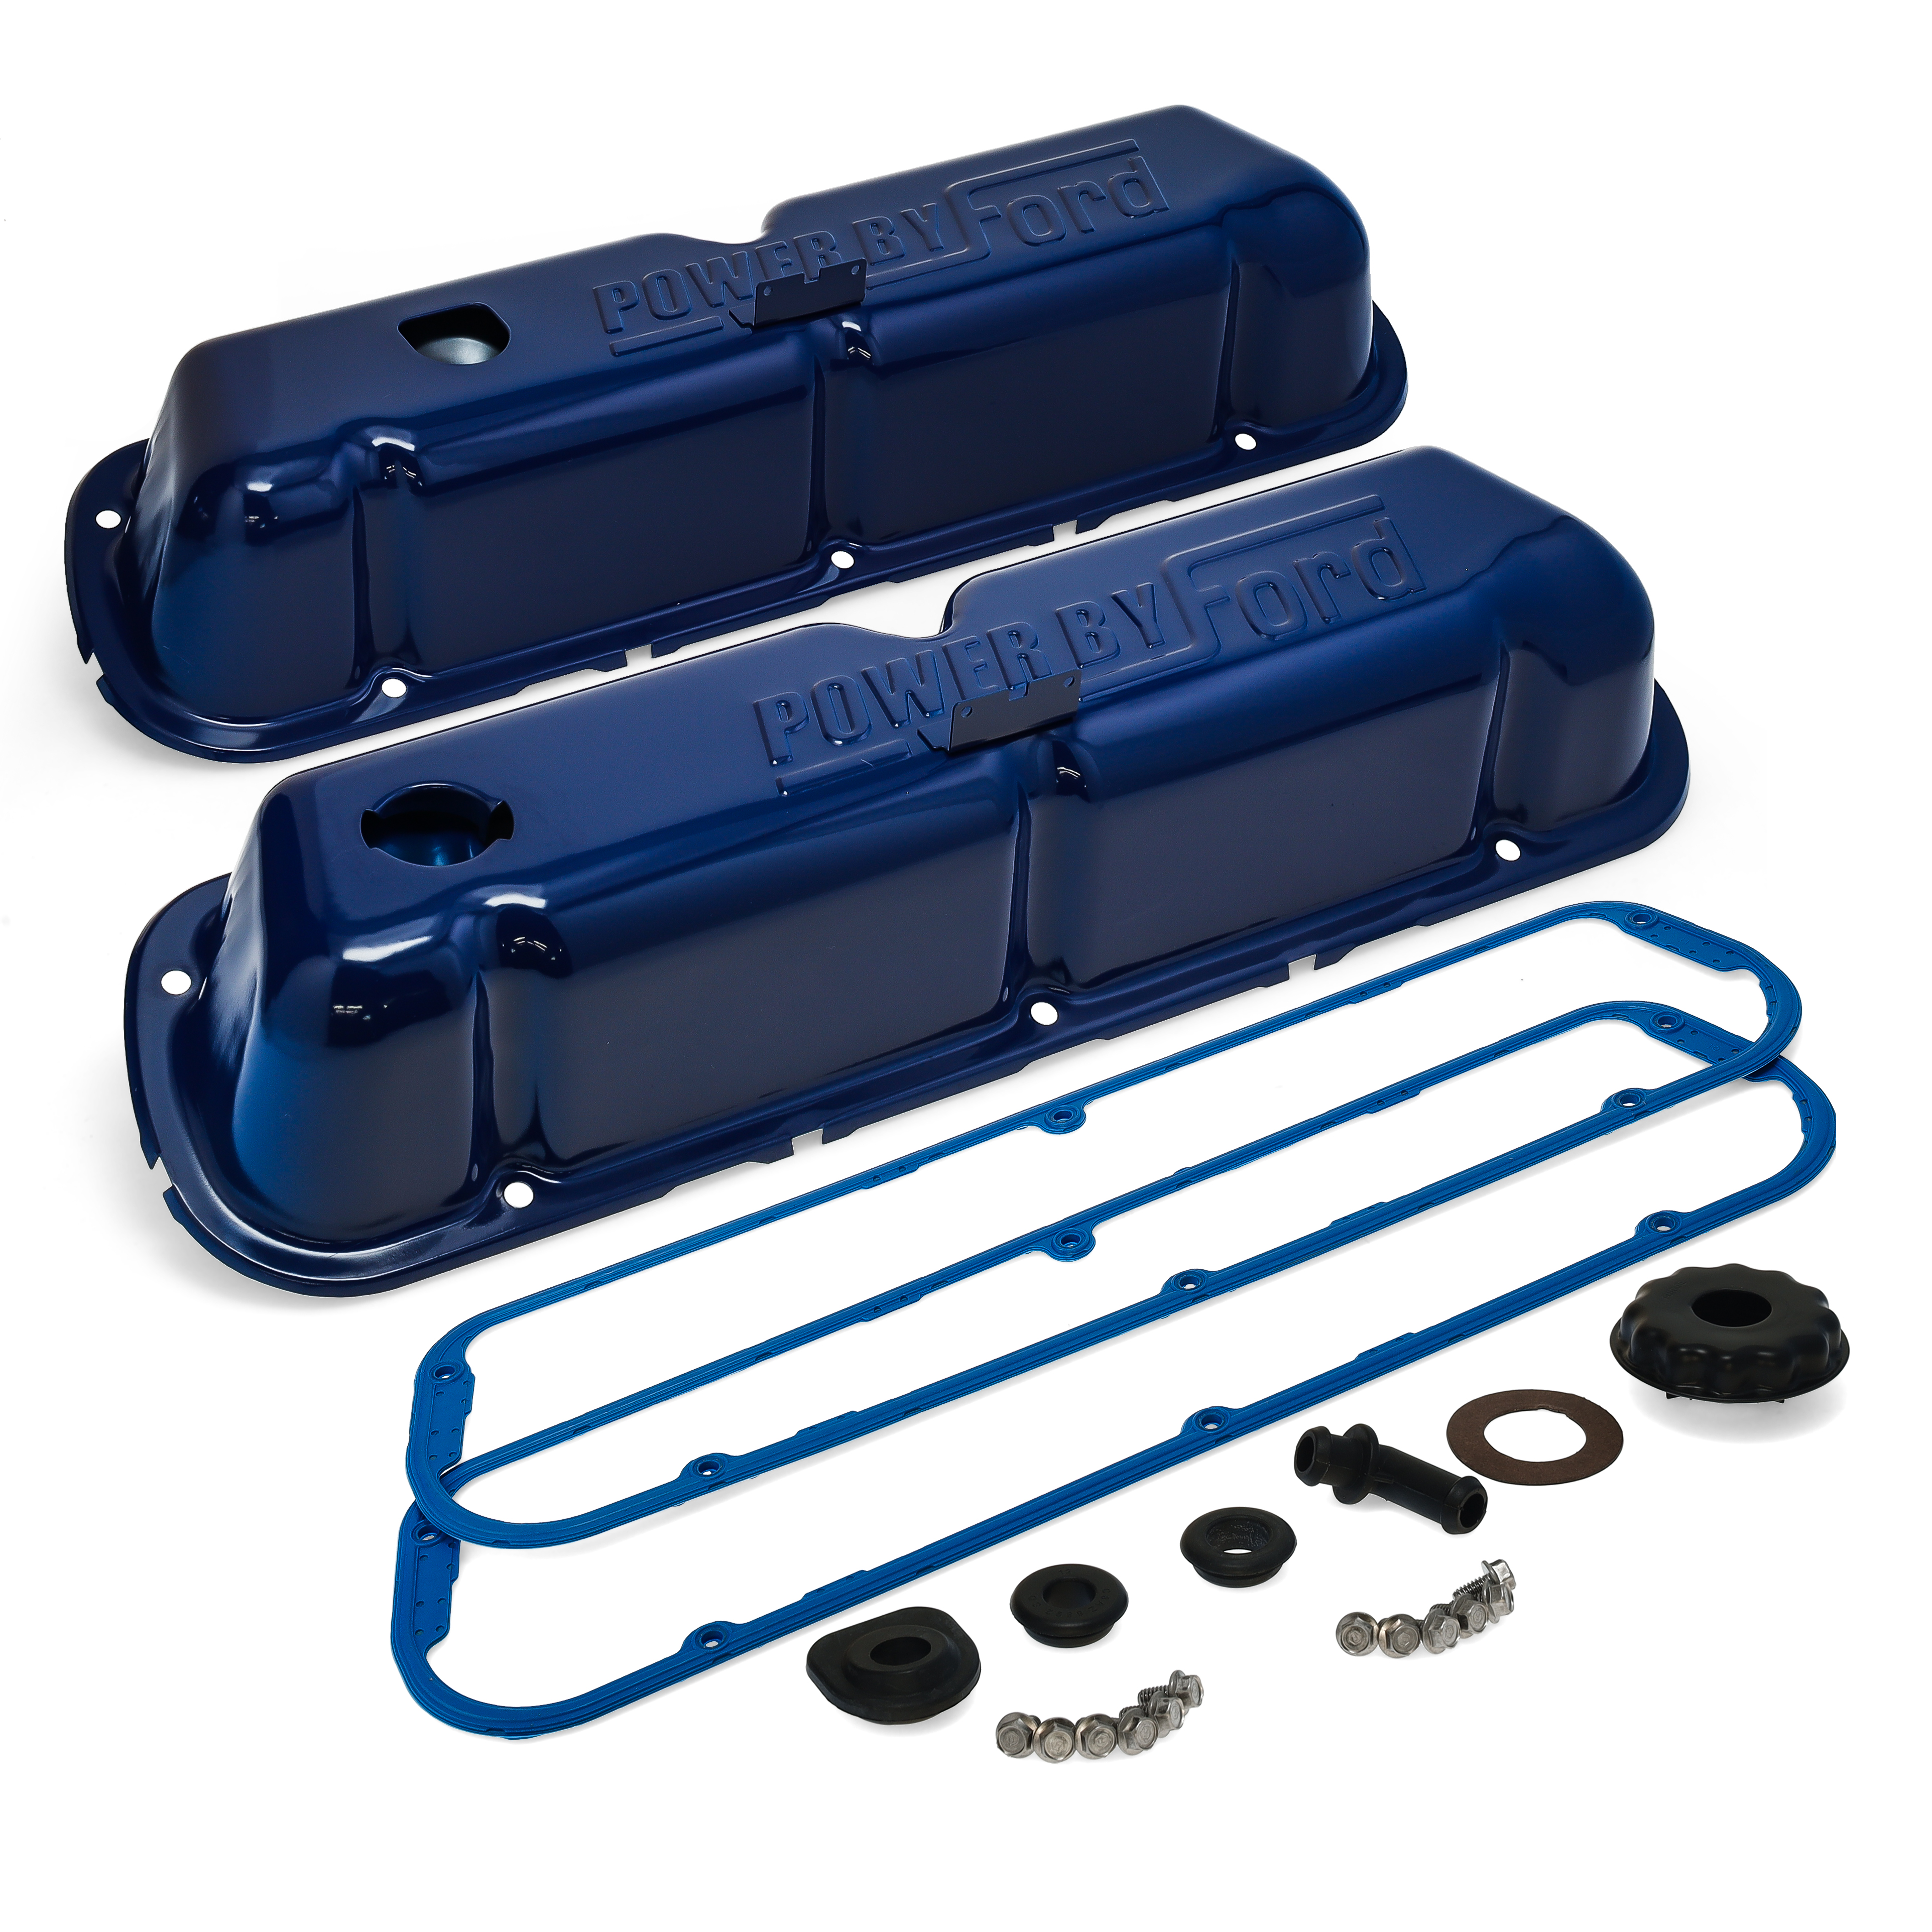 Blue Power by Ford Valve Covers Kit, SBF V8, 66-79 Bronco